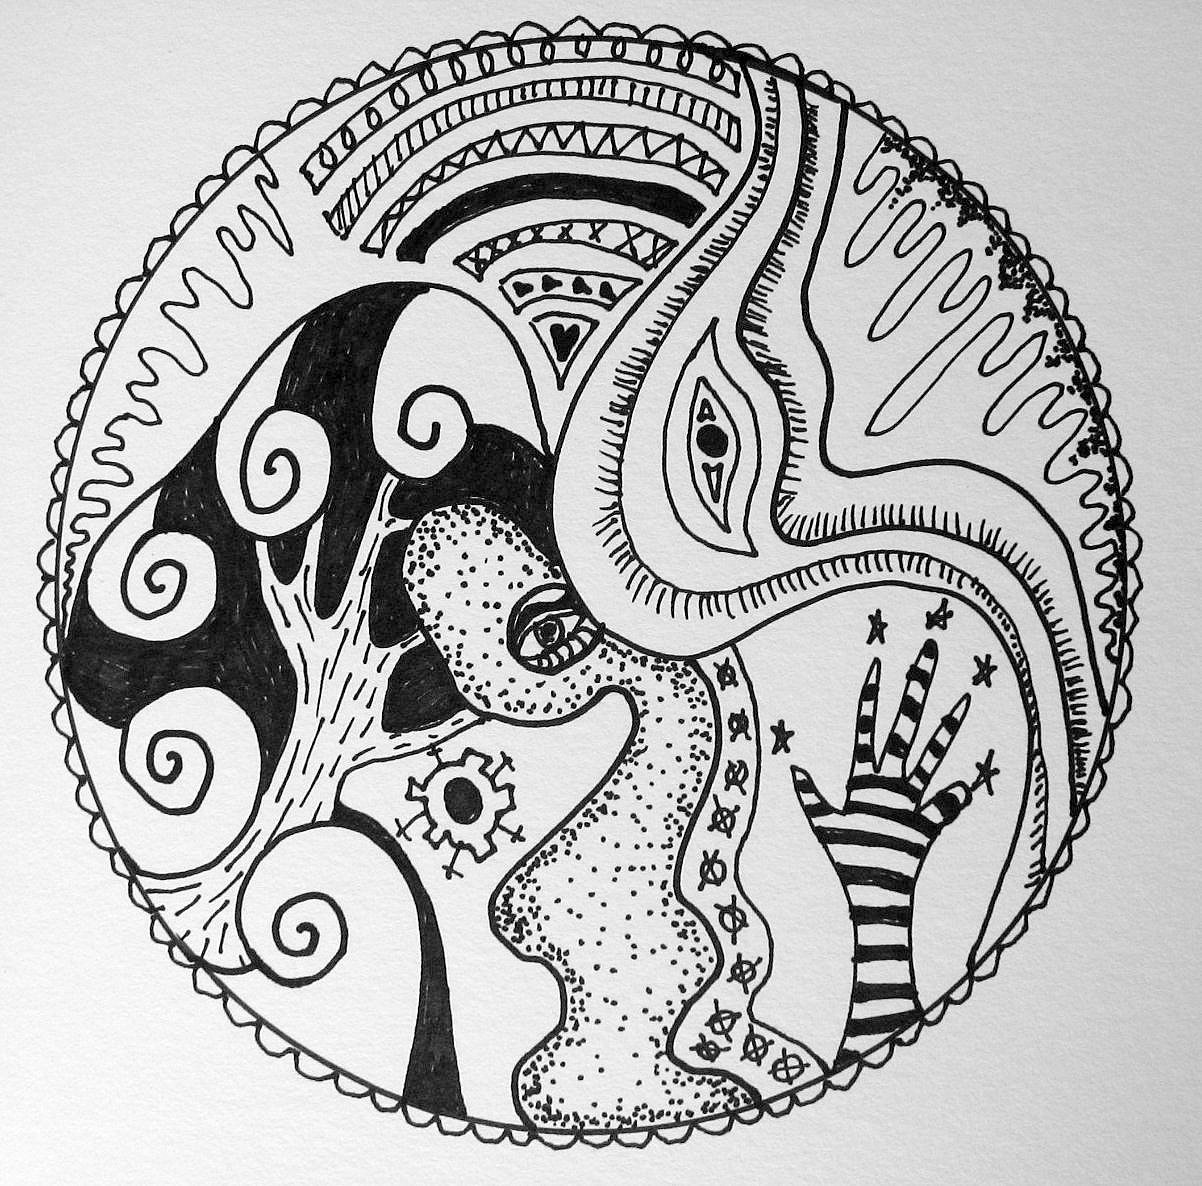 Create-A-Craft-A-Day: A Zentangle Painting